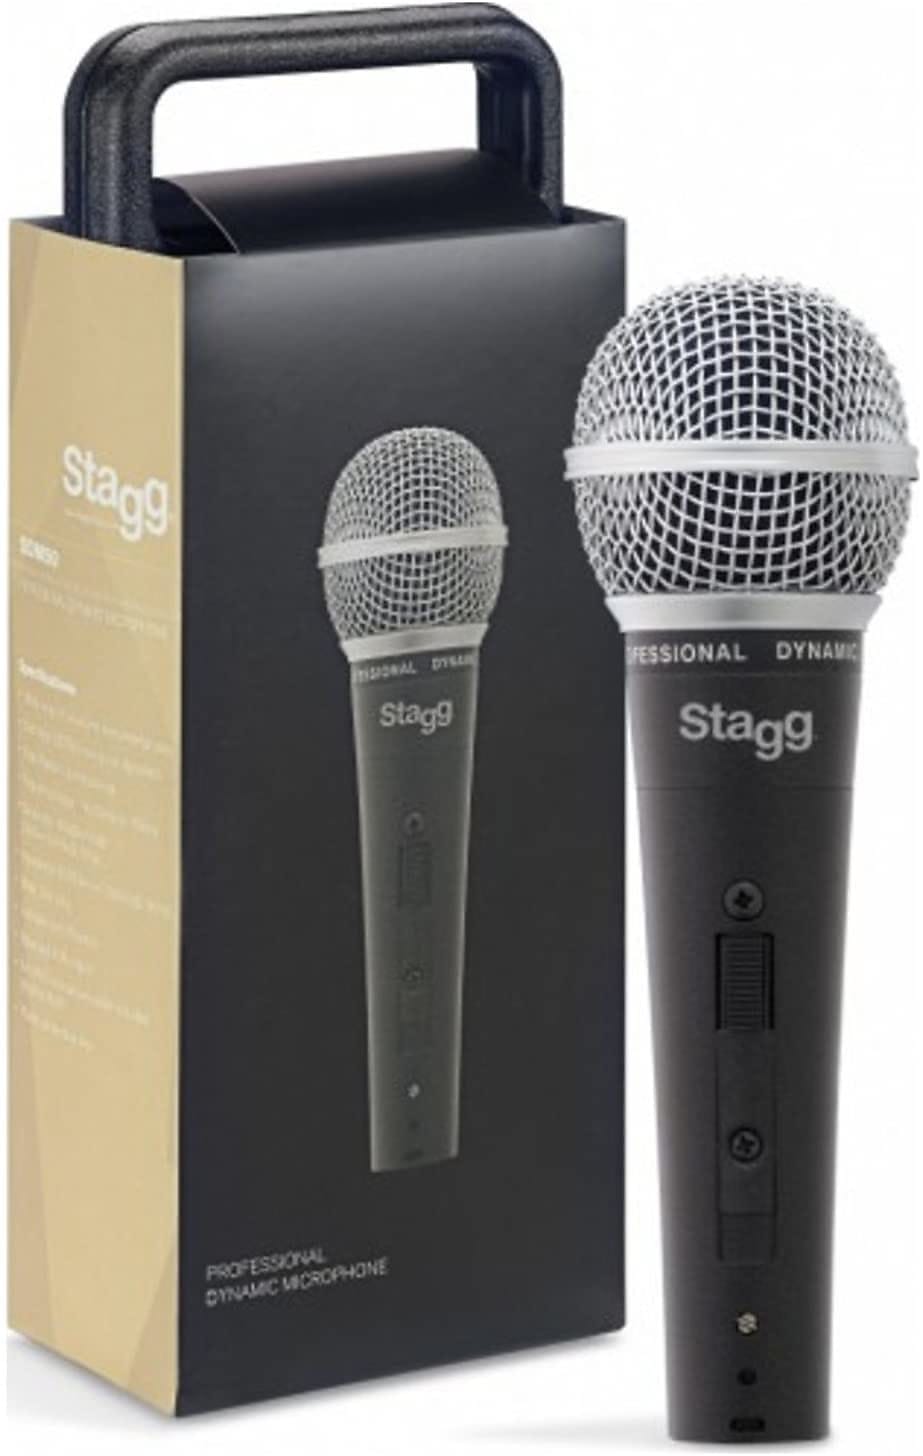 Stagg SDM50 Professional Dynamic Microphone Guitars on Main